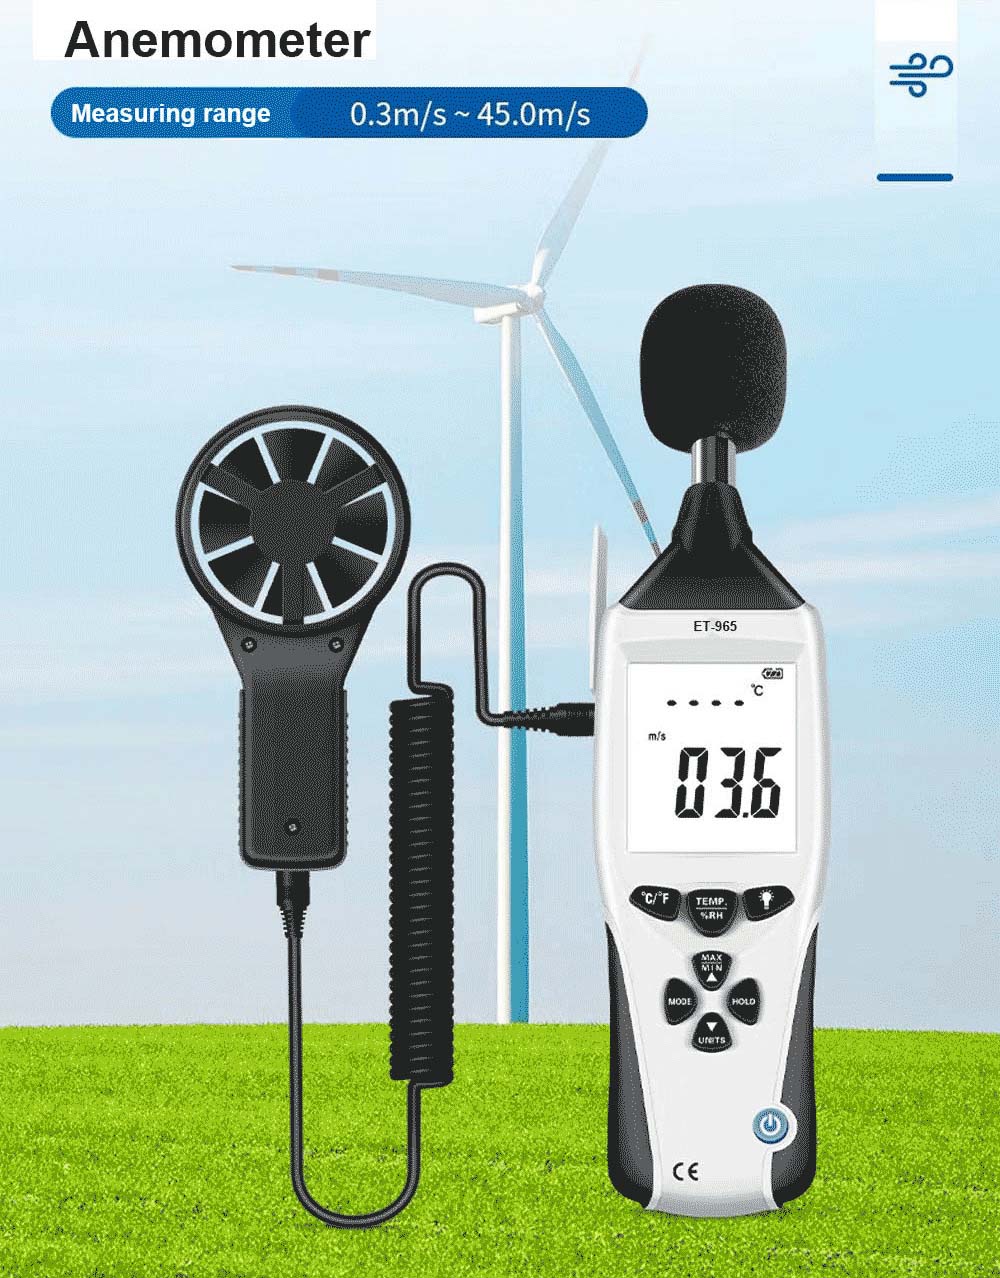 ET-965 5 in 1 Multifunction Environment Meter with Sound Level Meter, Light Meter, Humidity, and Temperature Fuction